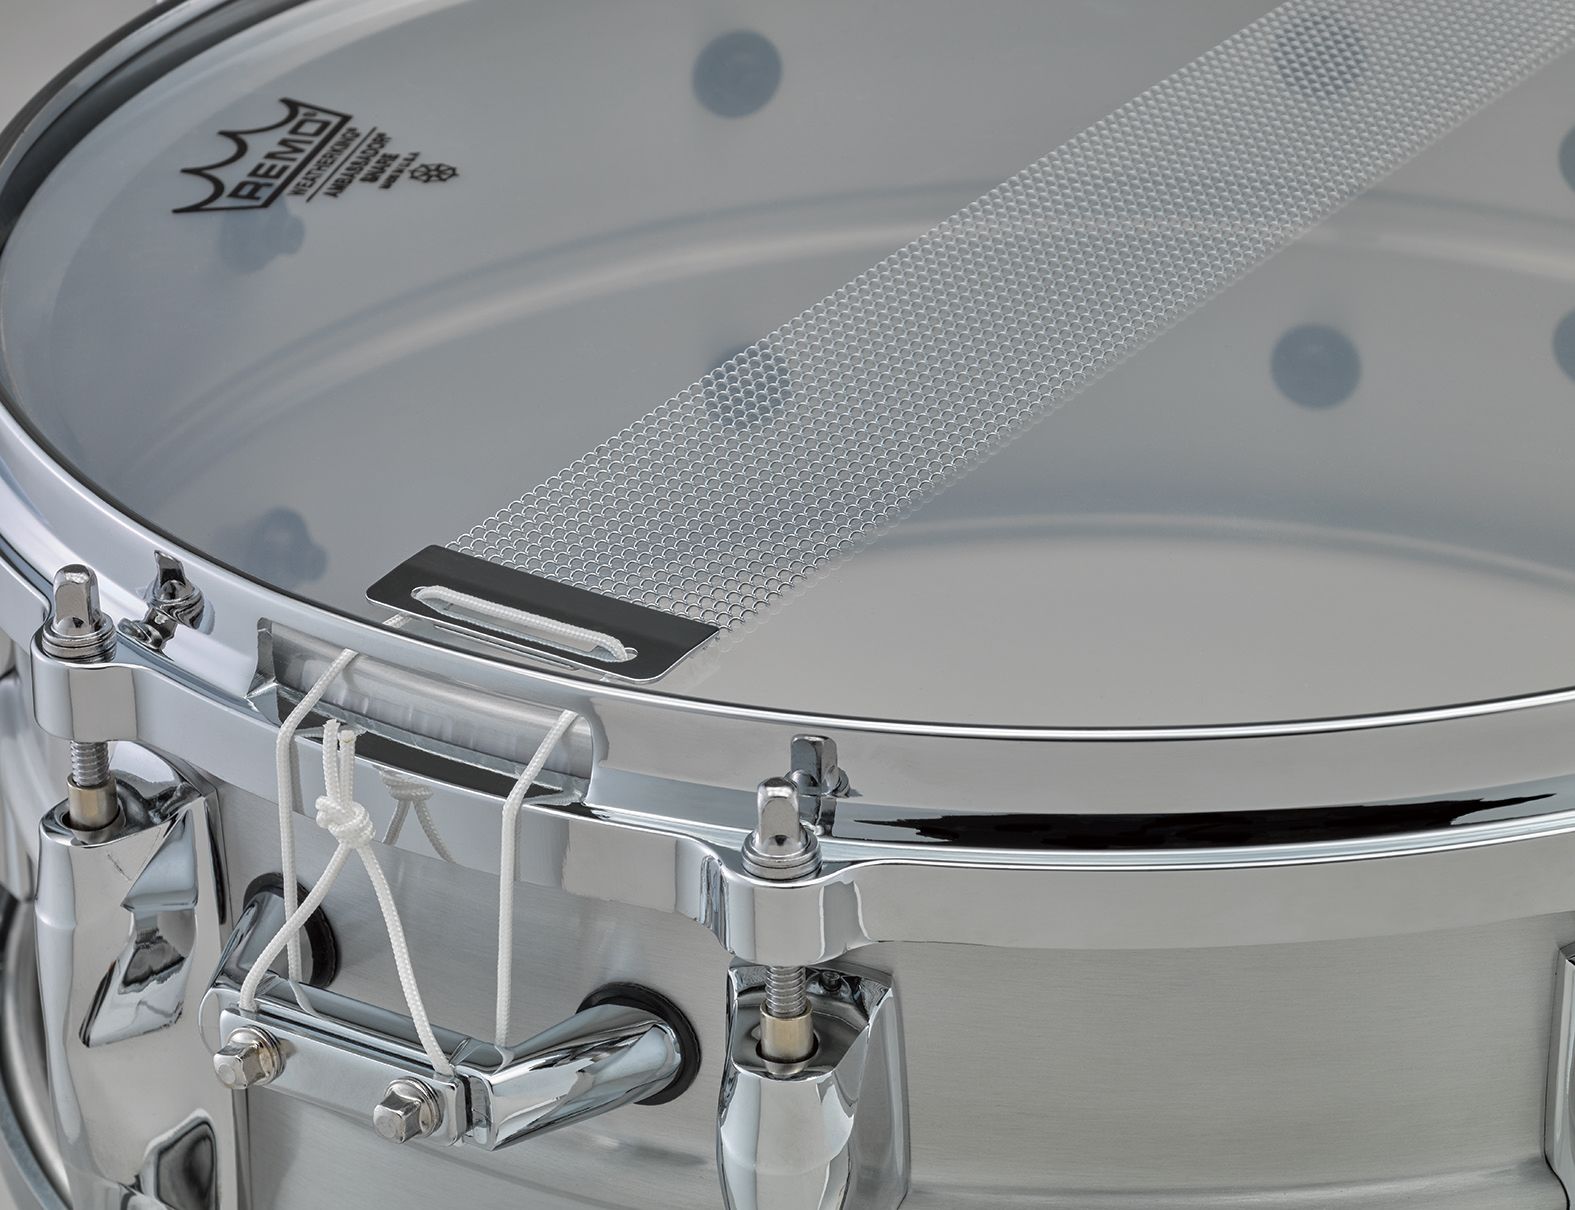 Snare wire - Overview - Accessories - Acoustic Drums - Drums - Musical  Instruments - Products - Yamaha - Other European Countries